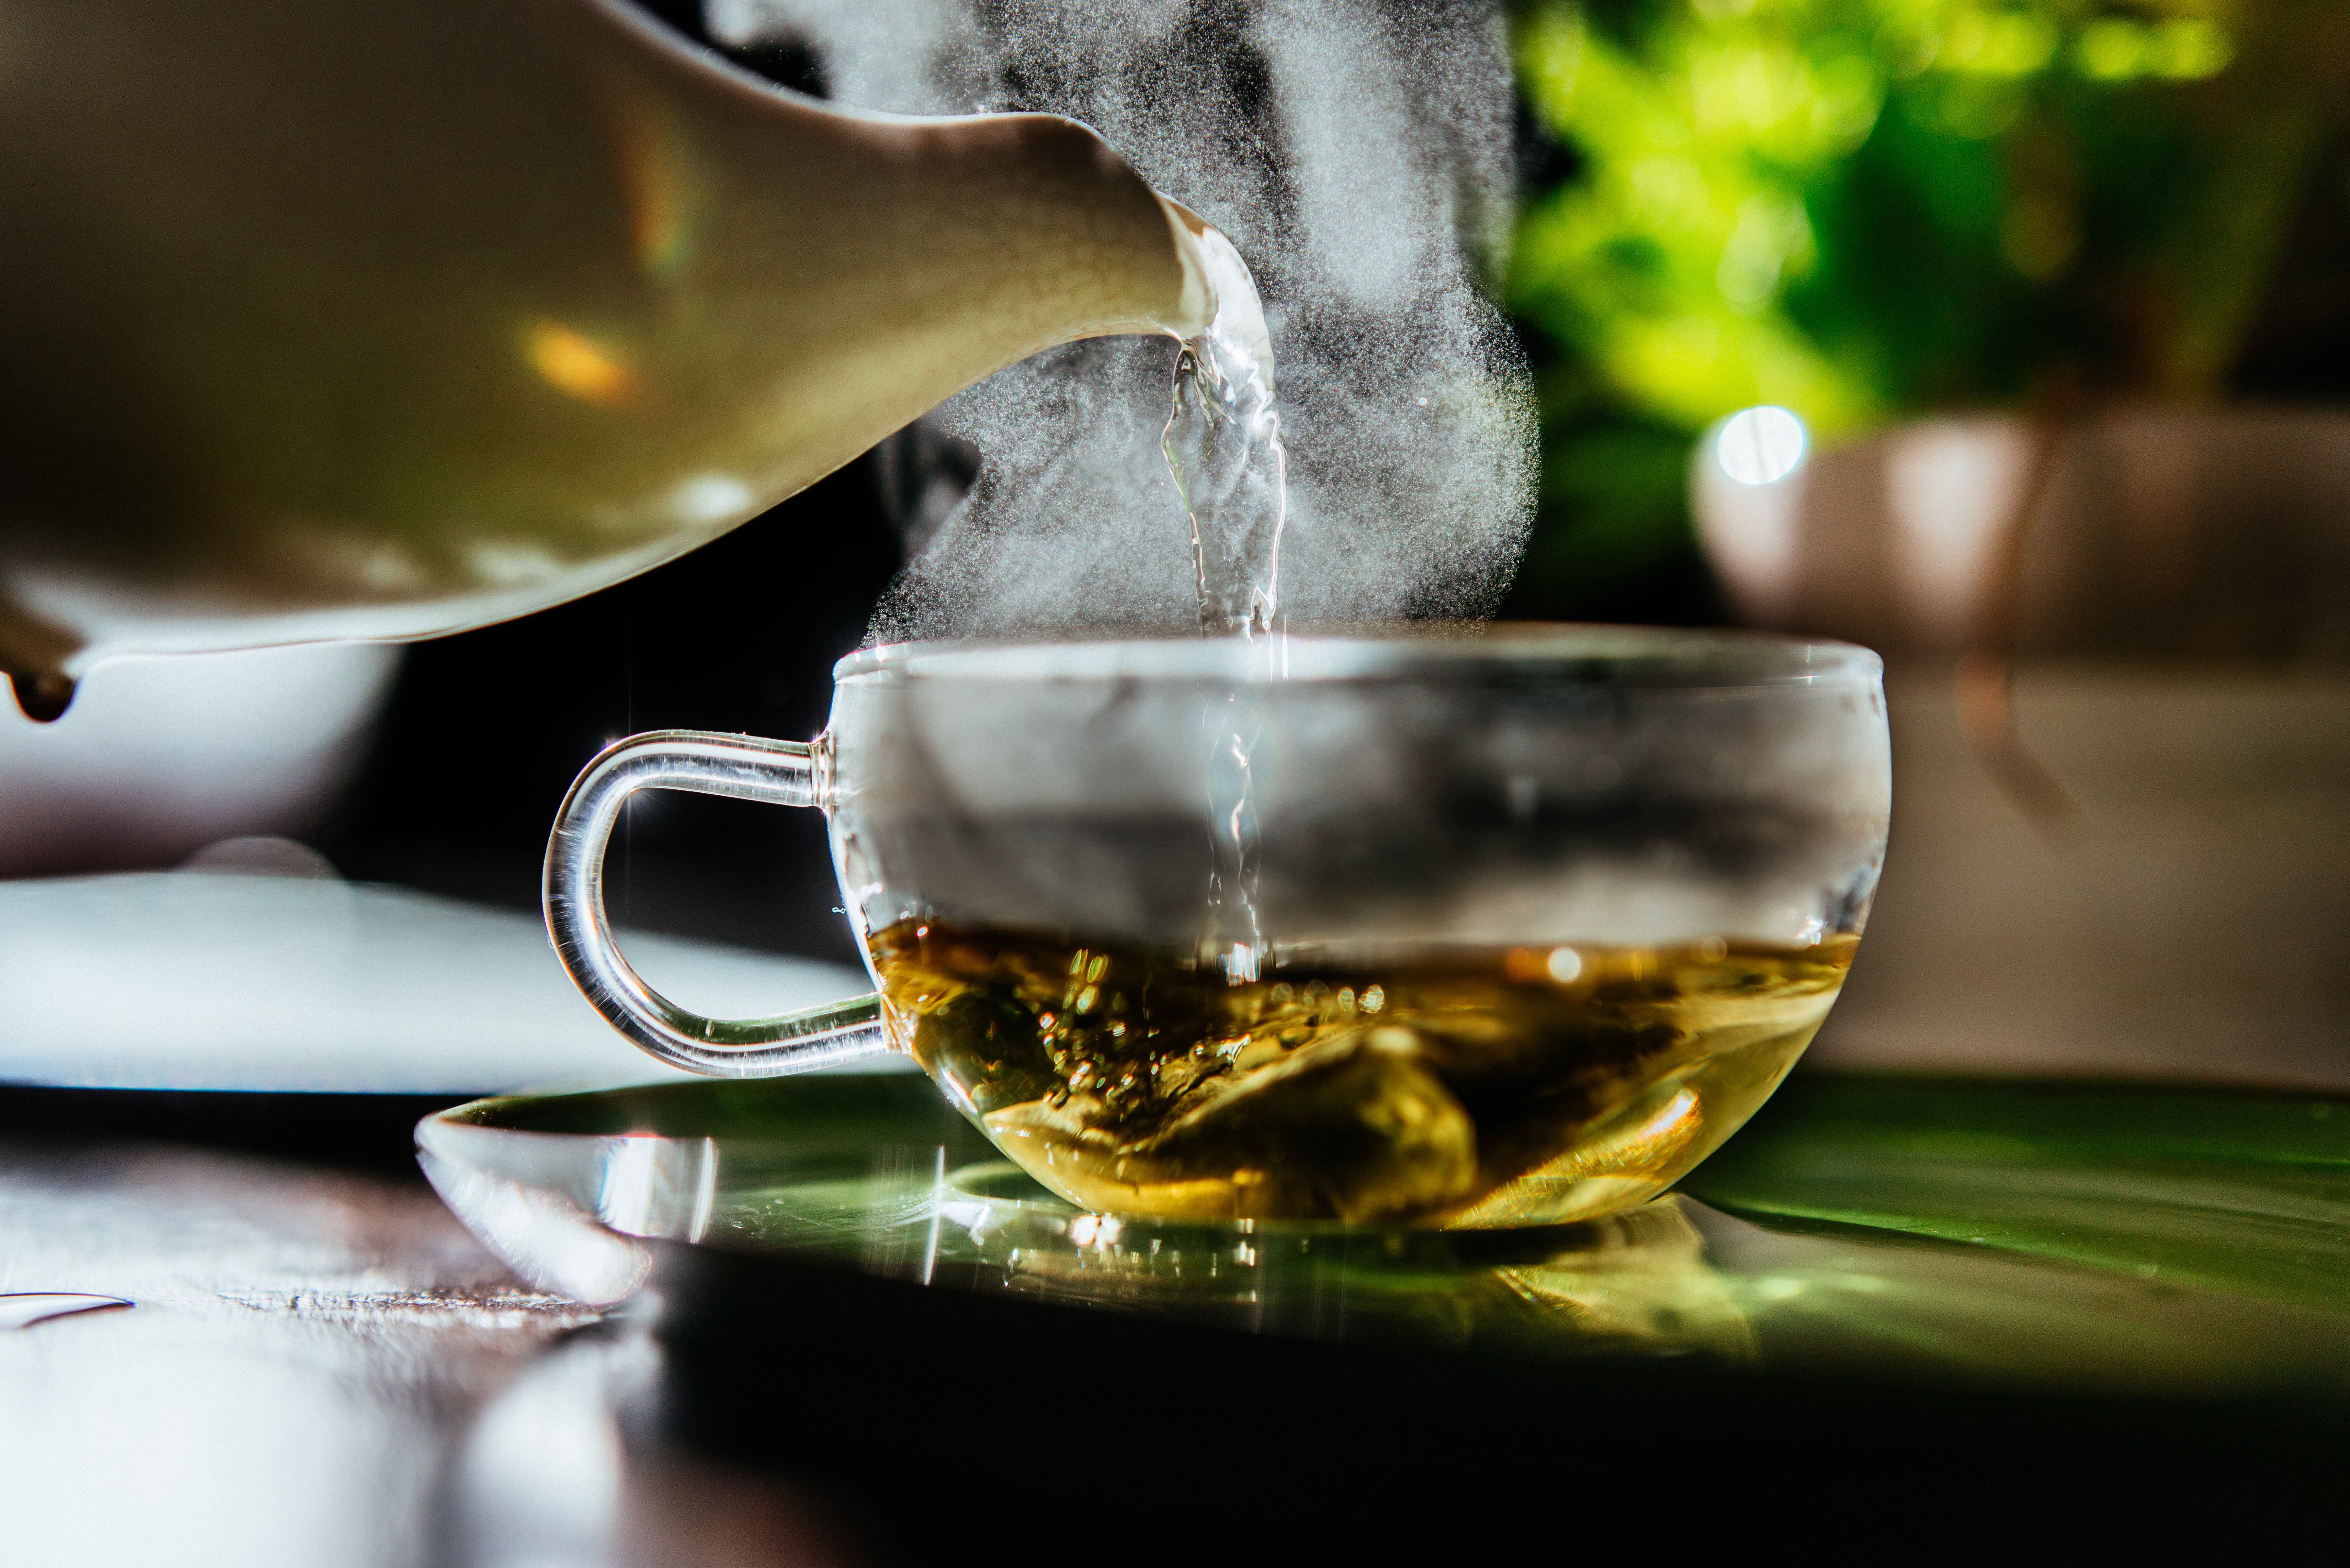 Traditional Medicinals: How the extract industry can best tap into the bagged tea sector - NutraIngredients-usa.com